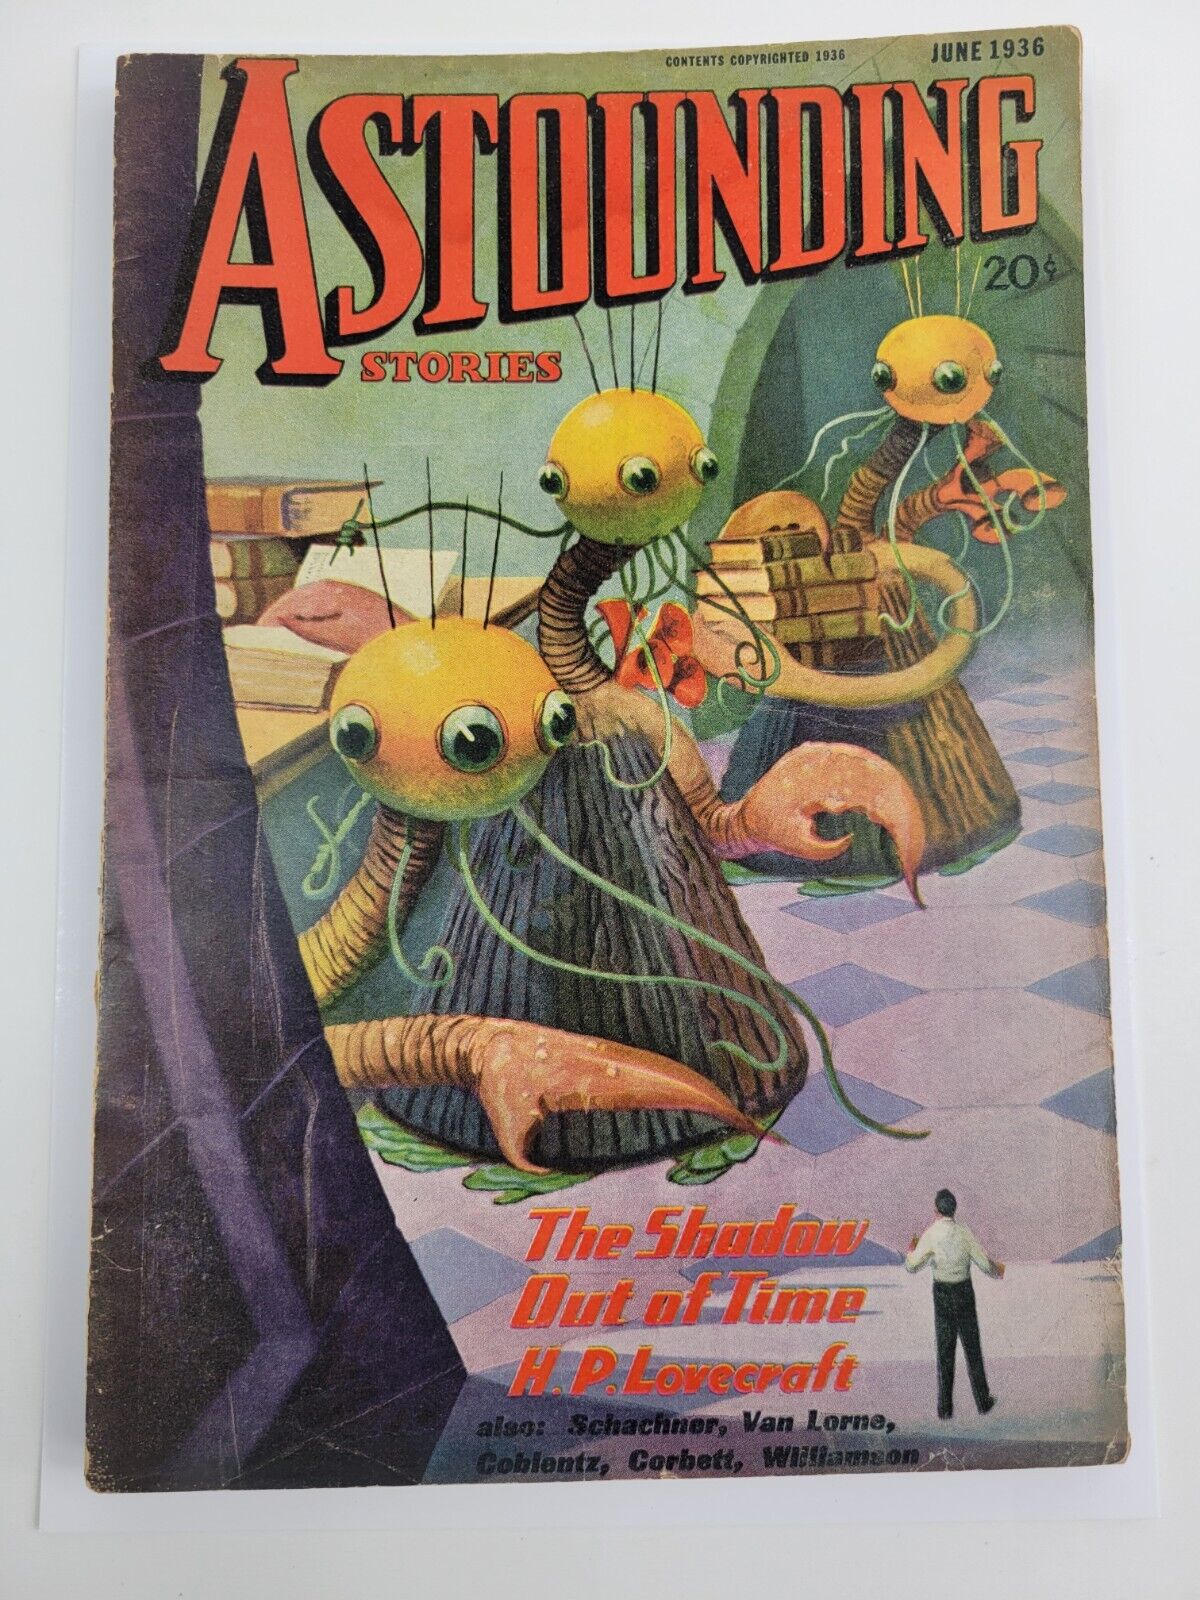 Astounding Stories Pulp Magazine June 1936 H.P. Lovecraft Mountains of Madness